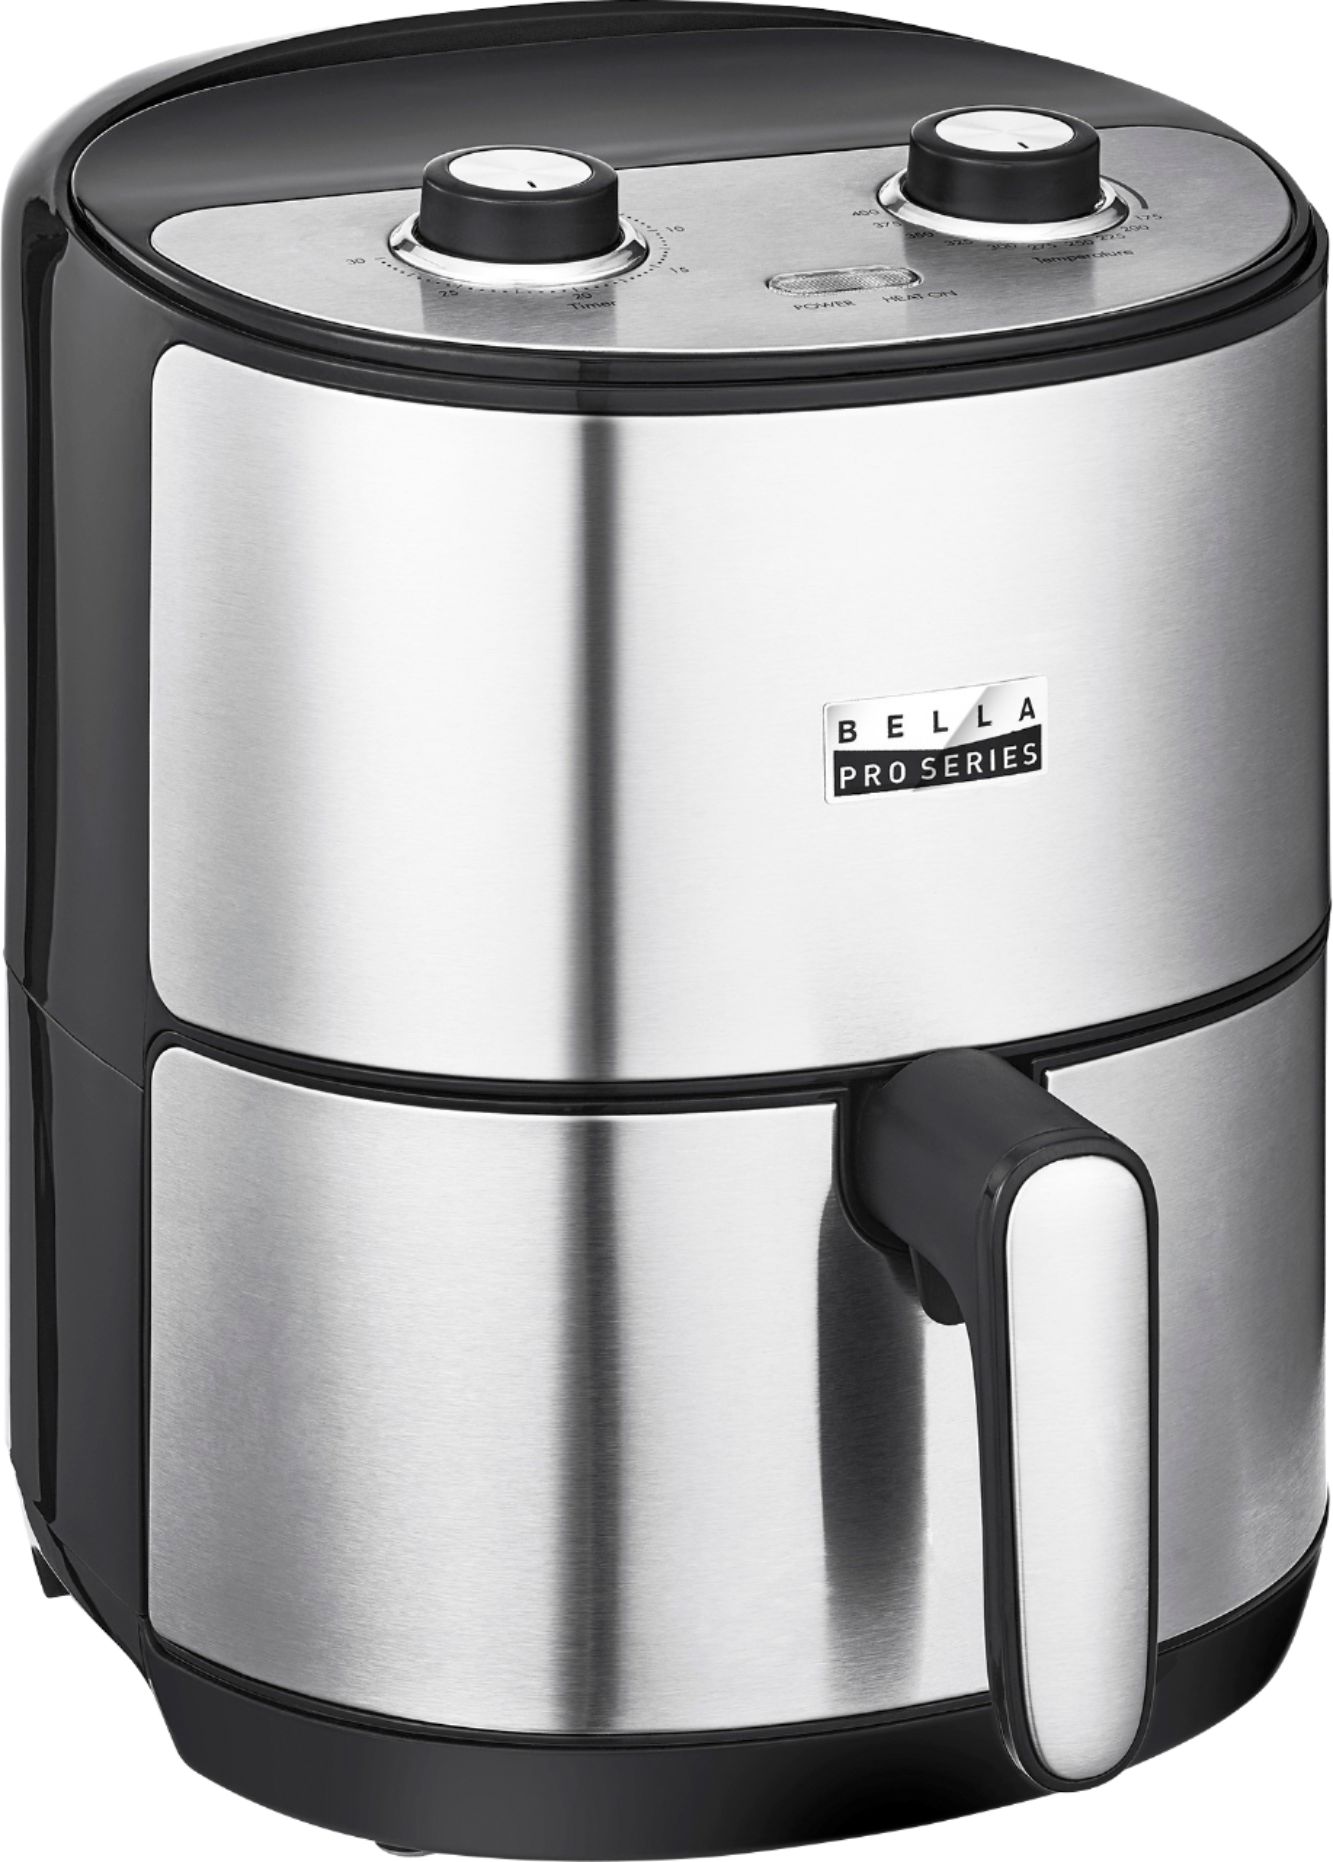 Angle View: Bella Pro Series - 4.3-qt. Analog Air Fryer - Stainless Steel